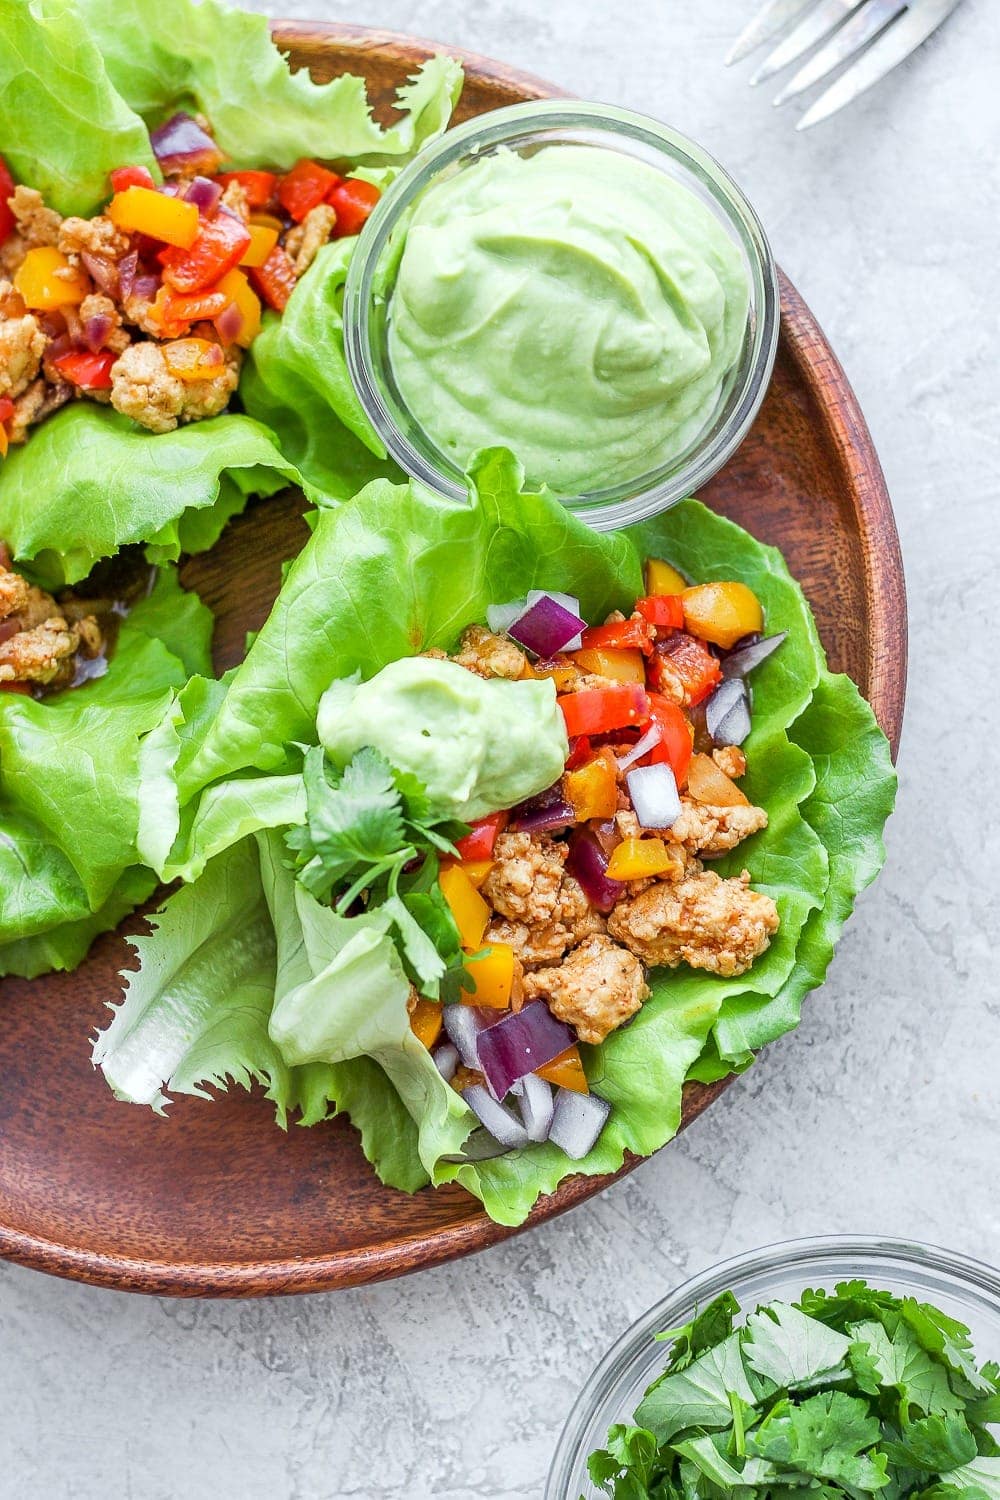 Lettuce wraps on a plate